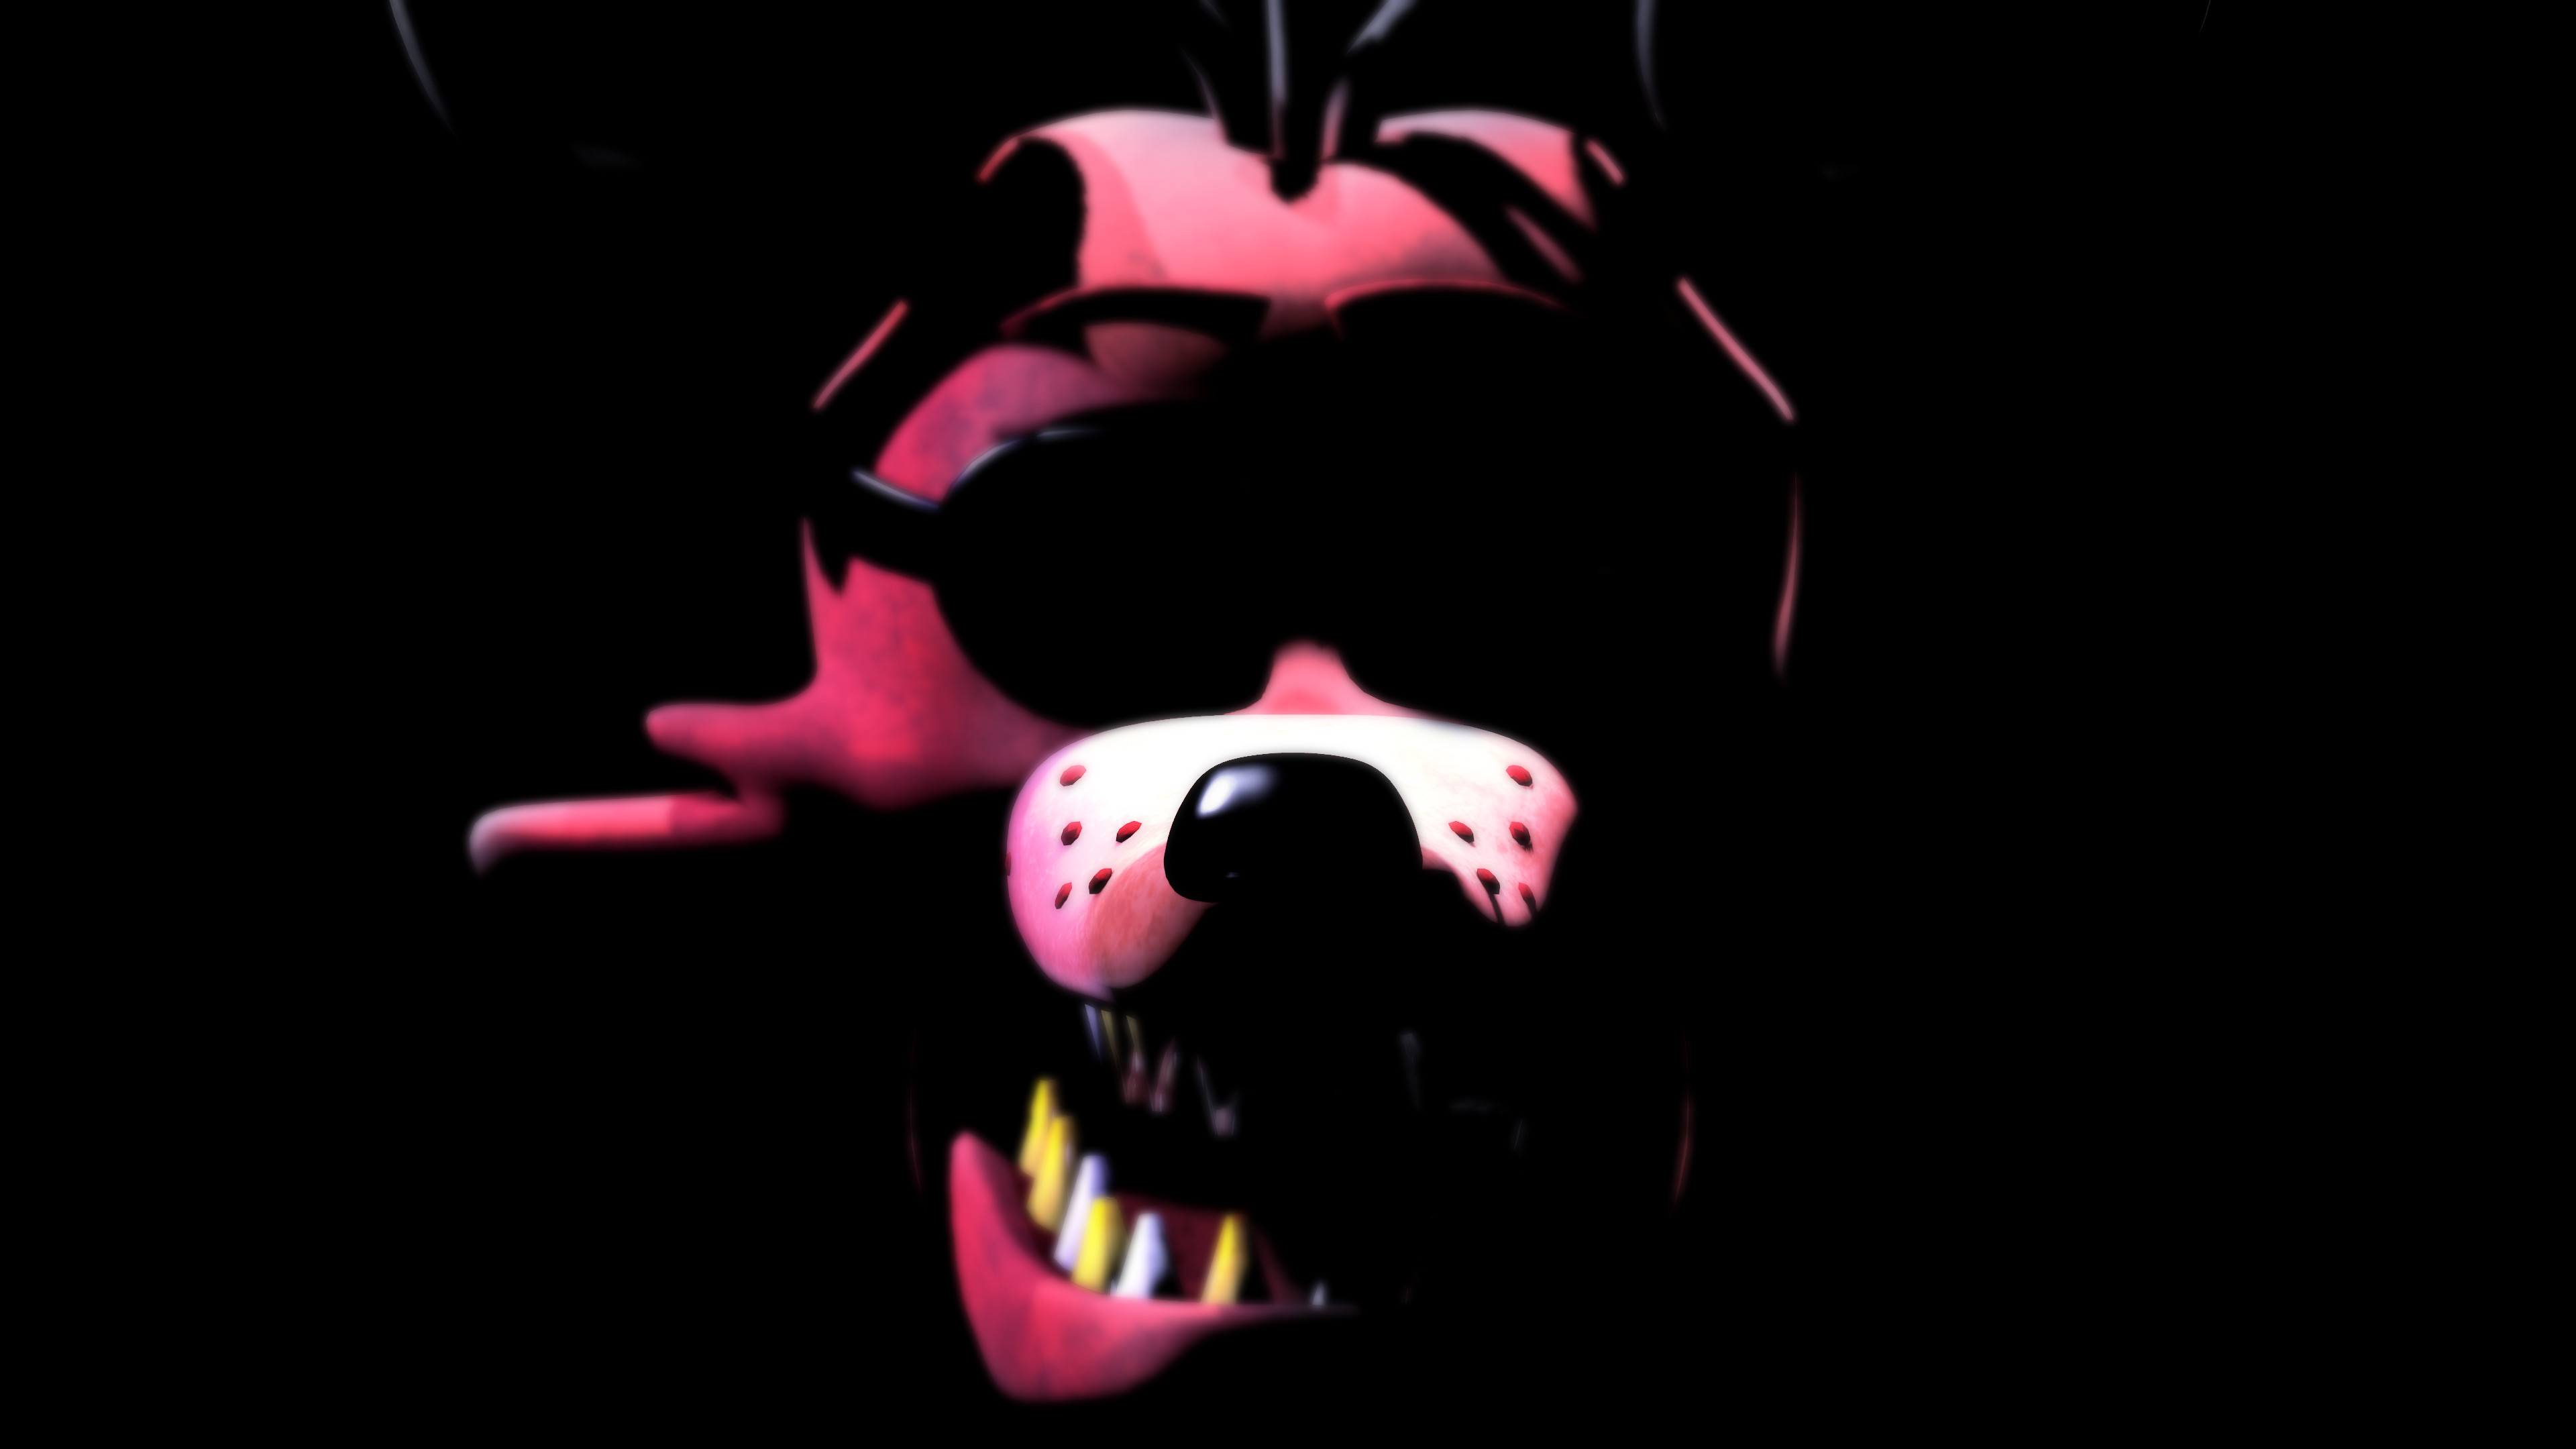 3840x2160 ... Five Nights at Freddy's | Poster/Wallpaper #4 by GravityPro